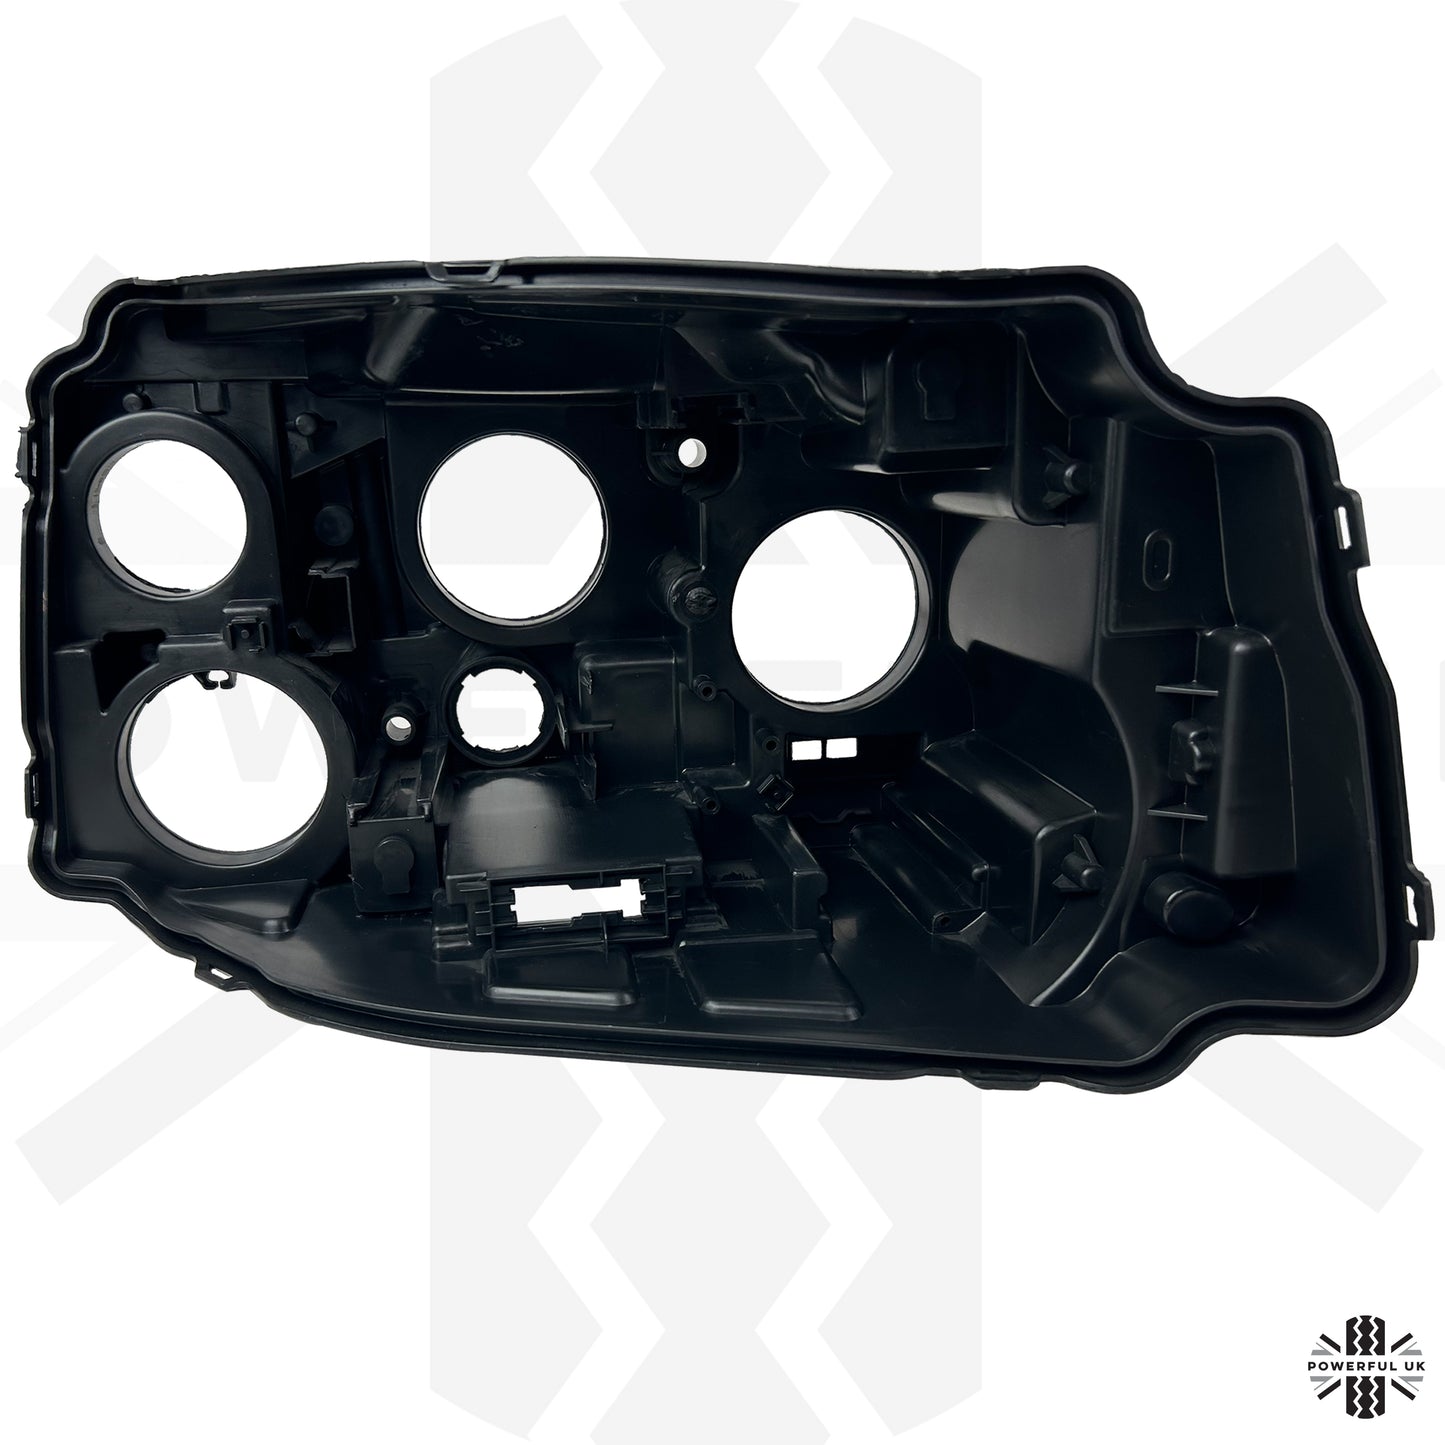 Replacement Headlight Rear Housing for Range Rover Sport L320 2010-13 - RH